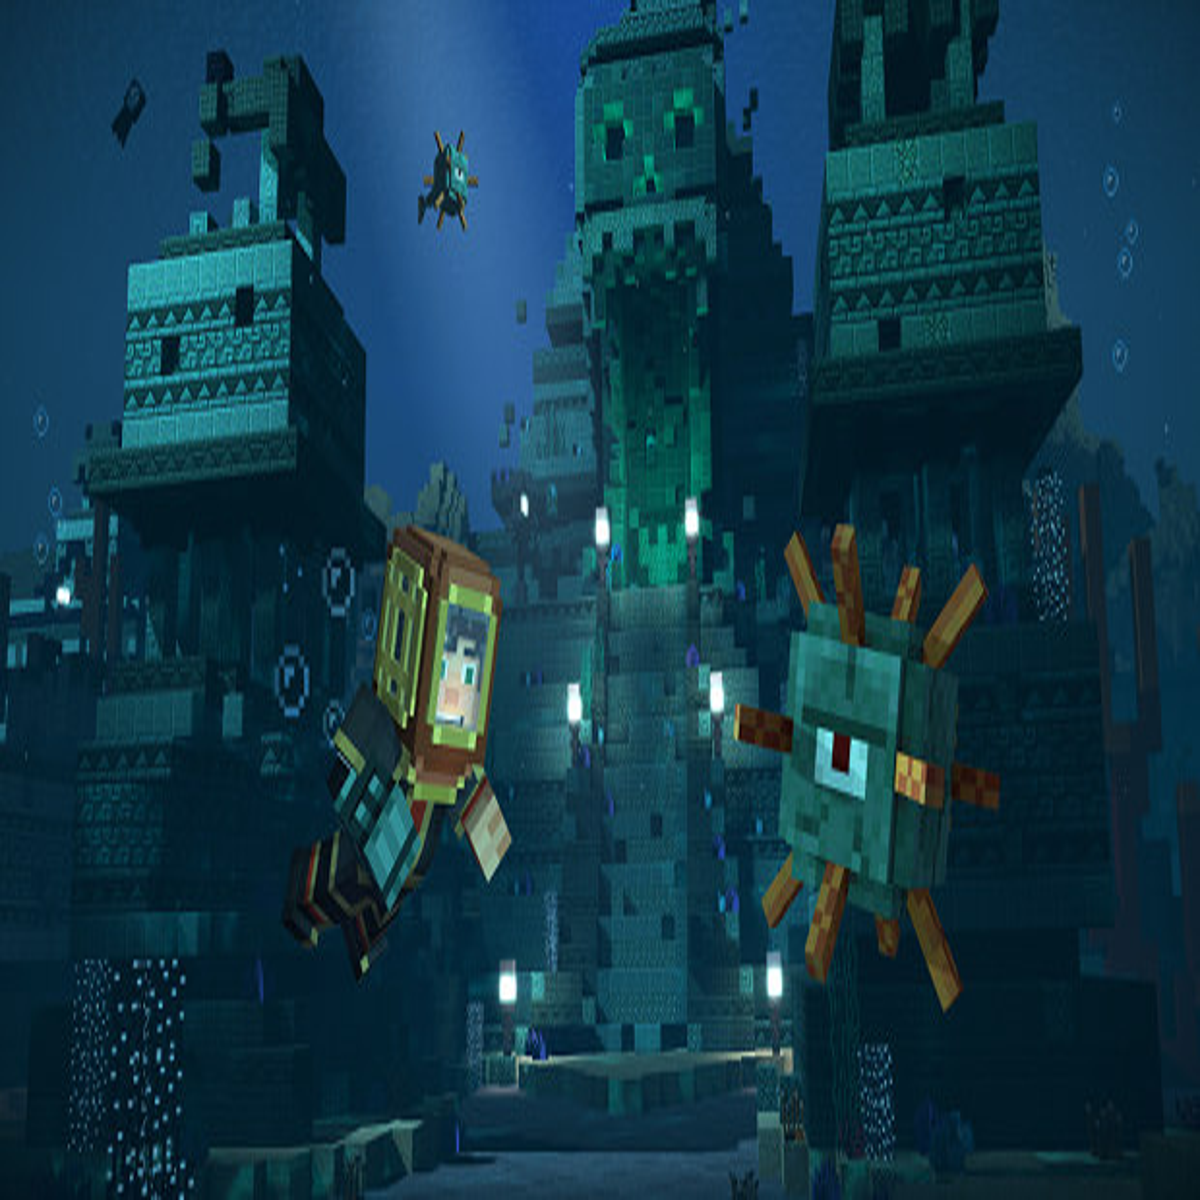 Telltale and Mojang Announce Minecraft: Story Mode